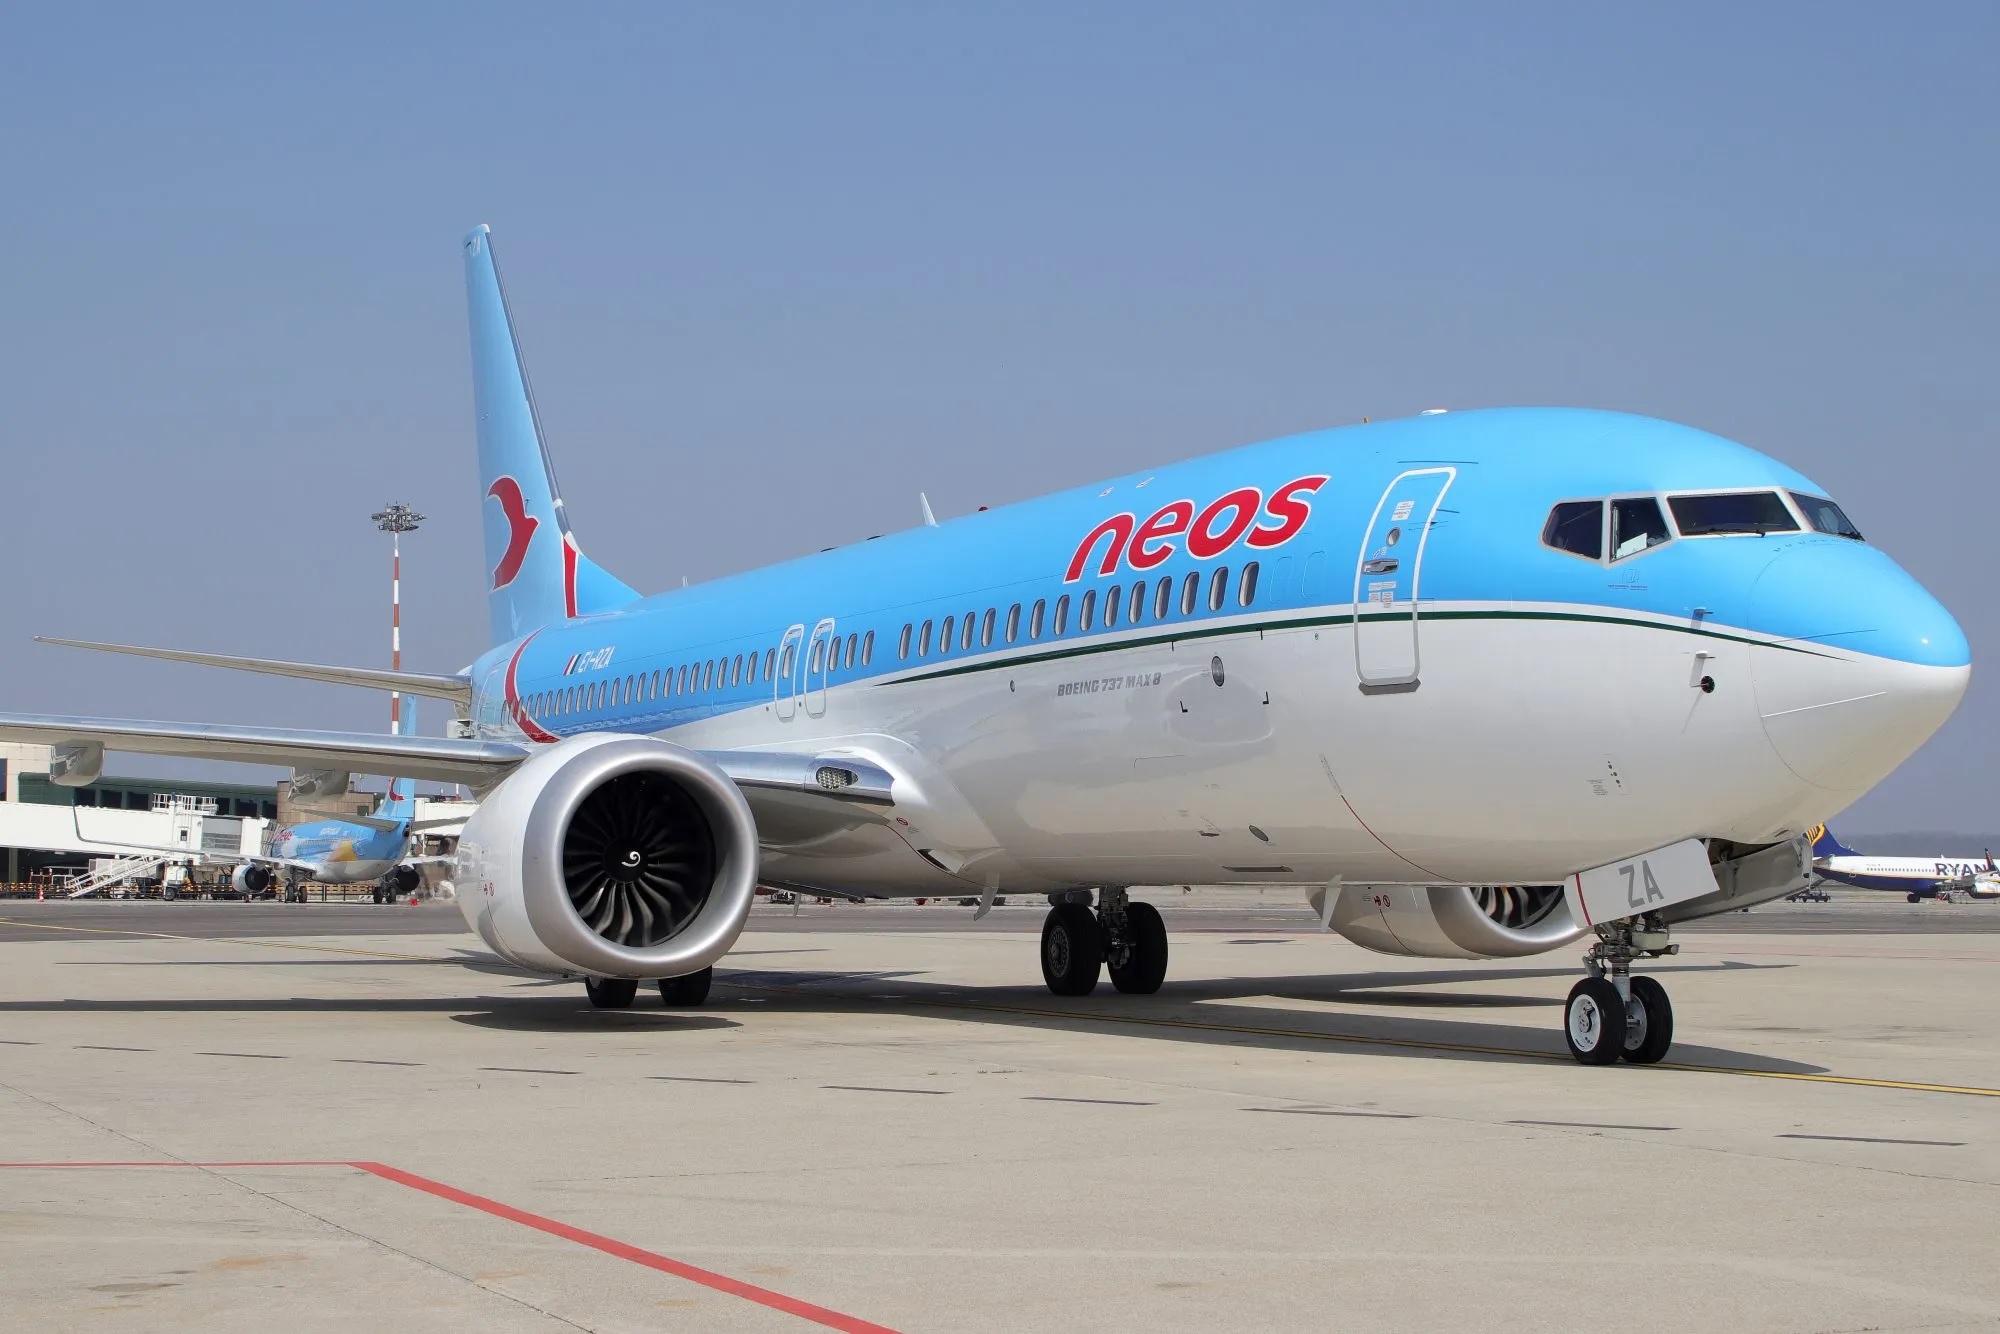 Neos' current fleet consists of six Boeing 737-800s, four Boeing 737 MAX 8s, and six Boeing 787-9s.